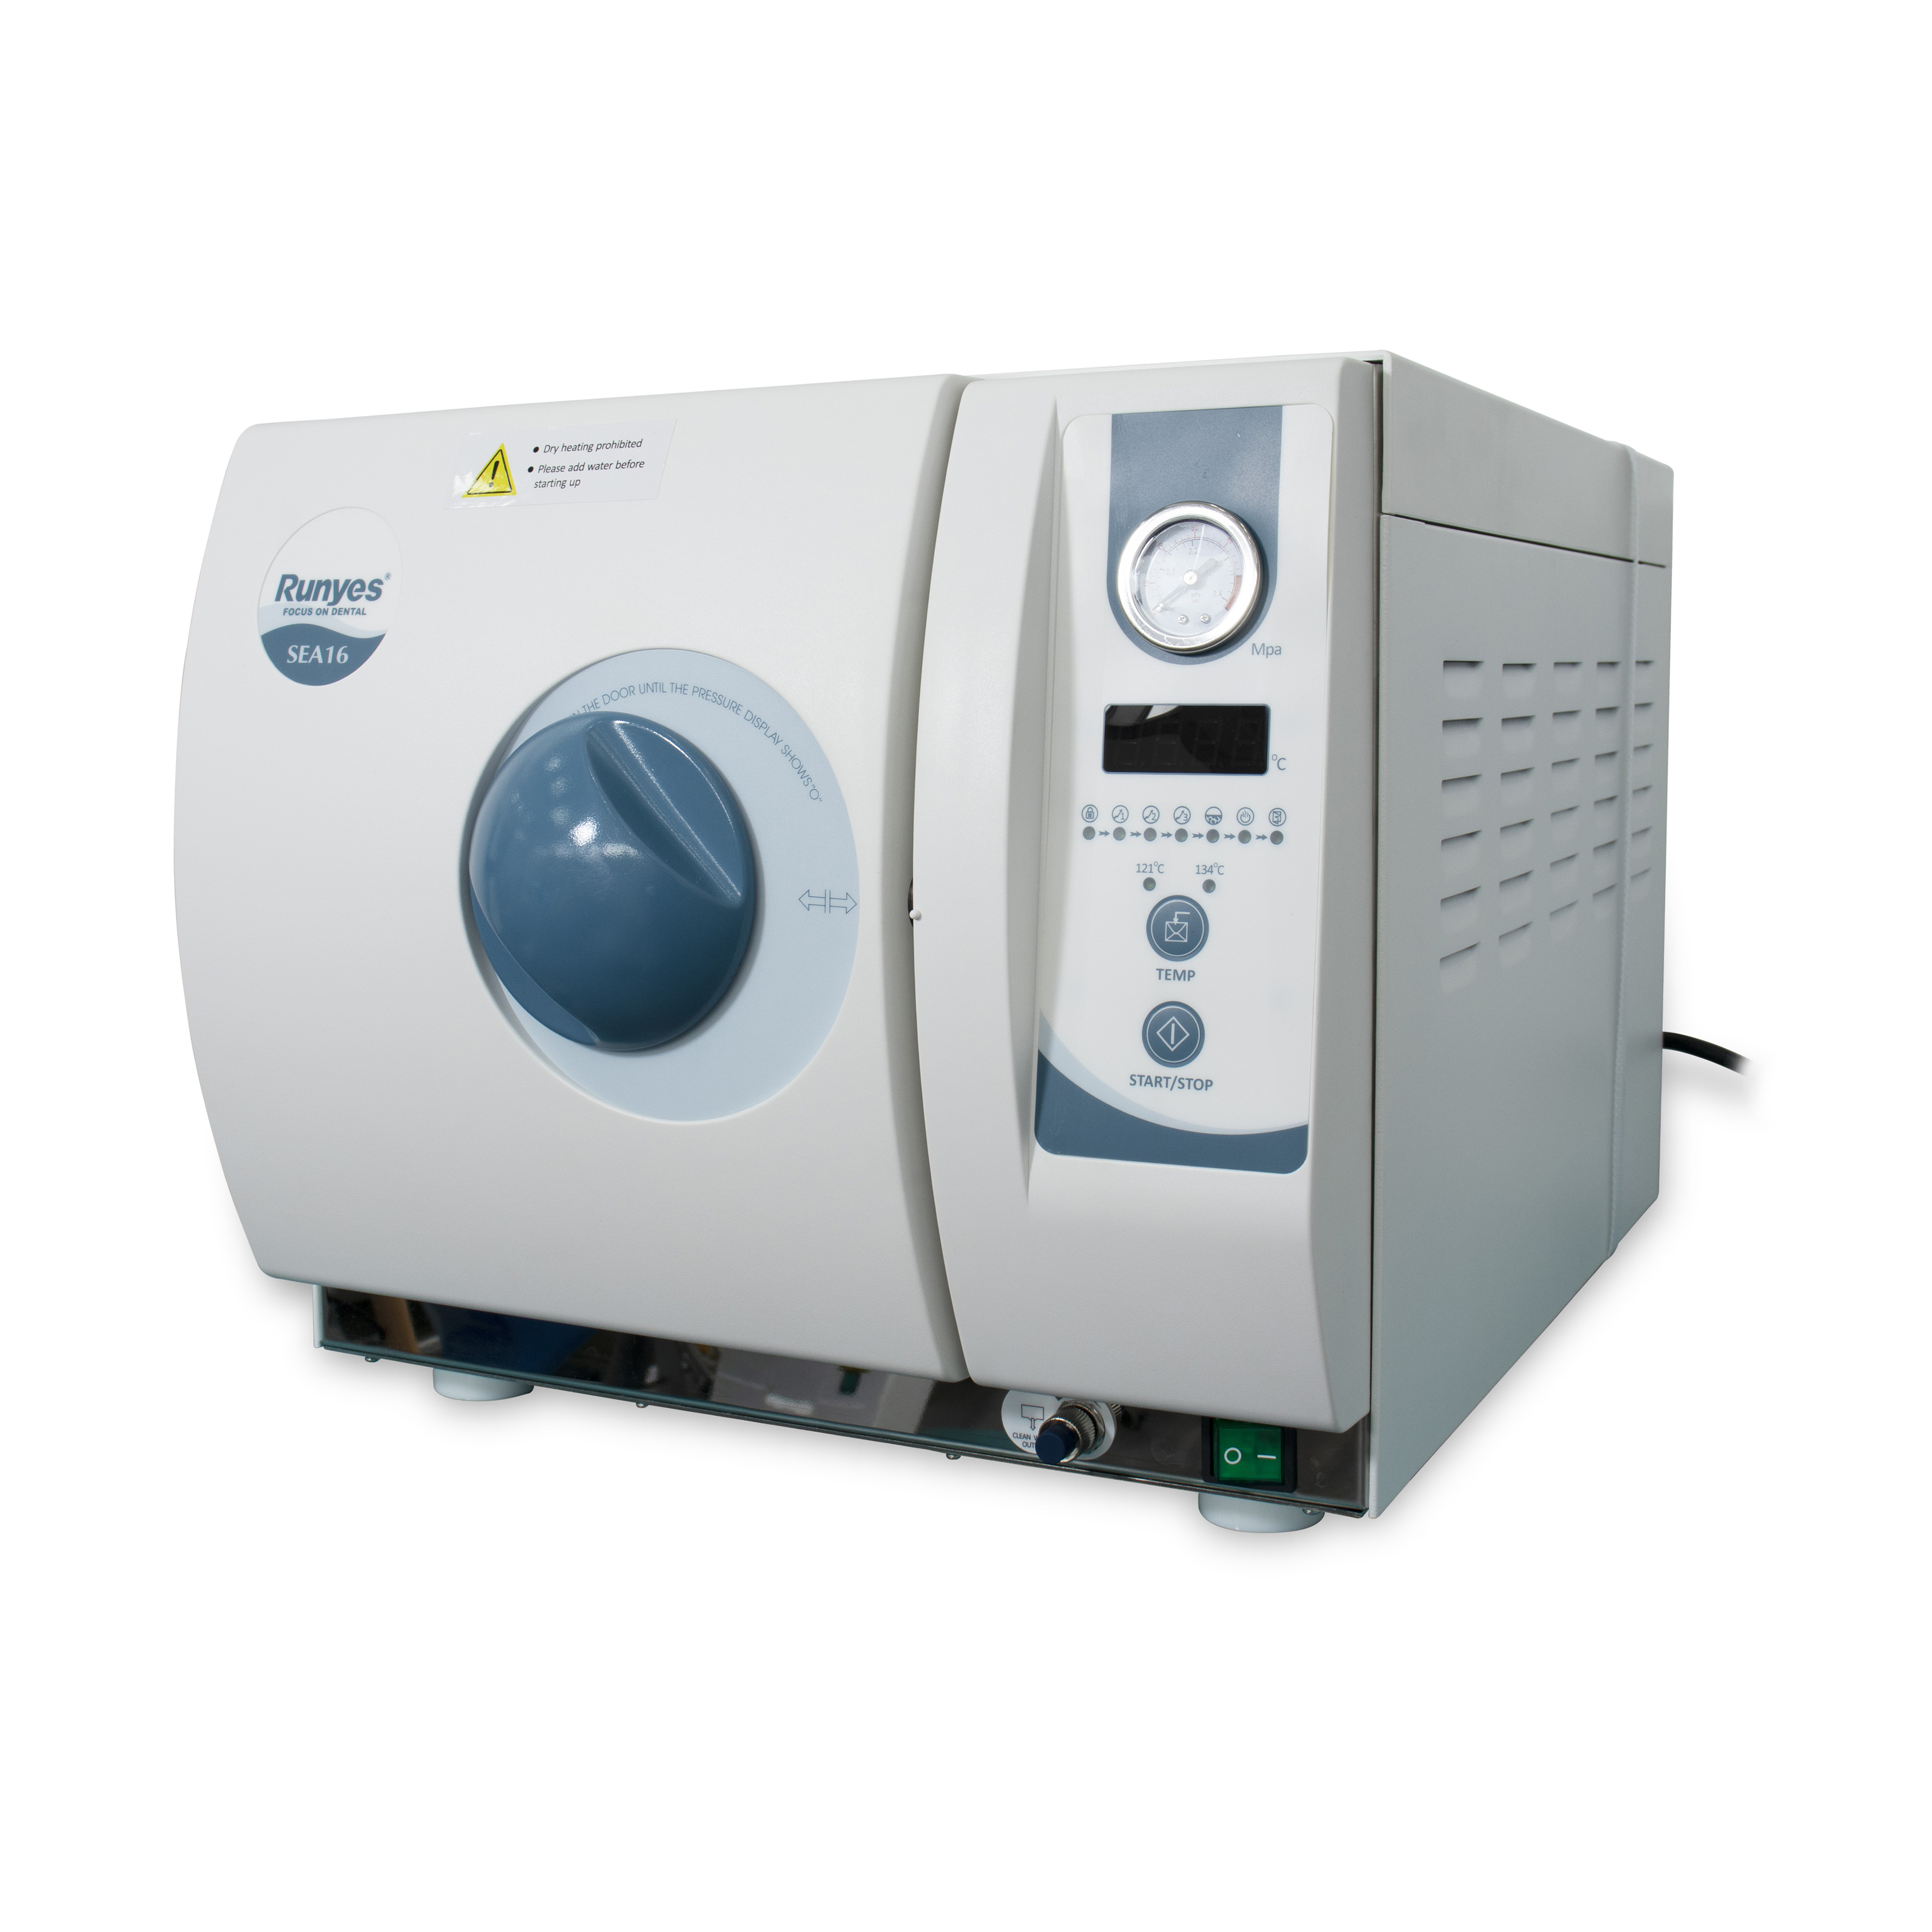 AUTOCLAVE RUNYES